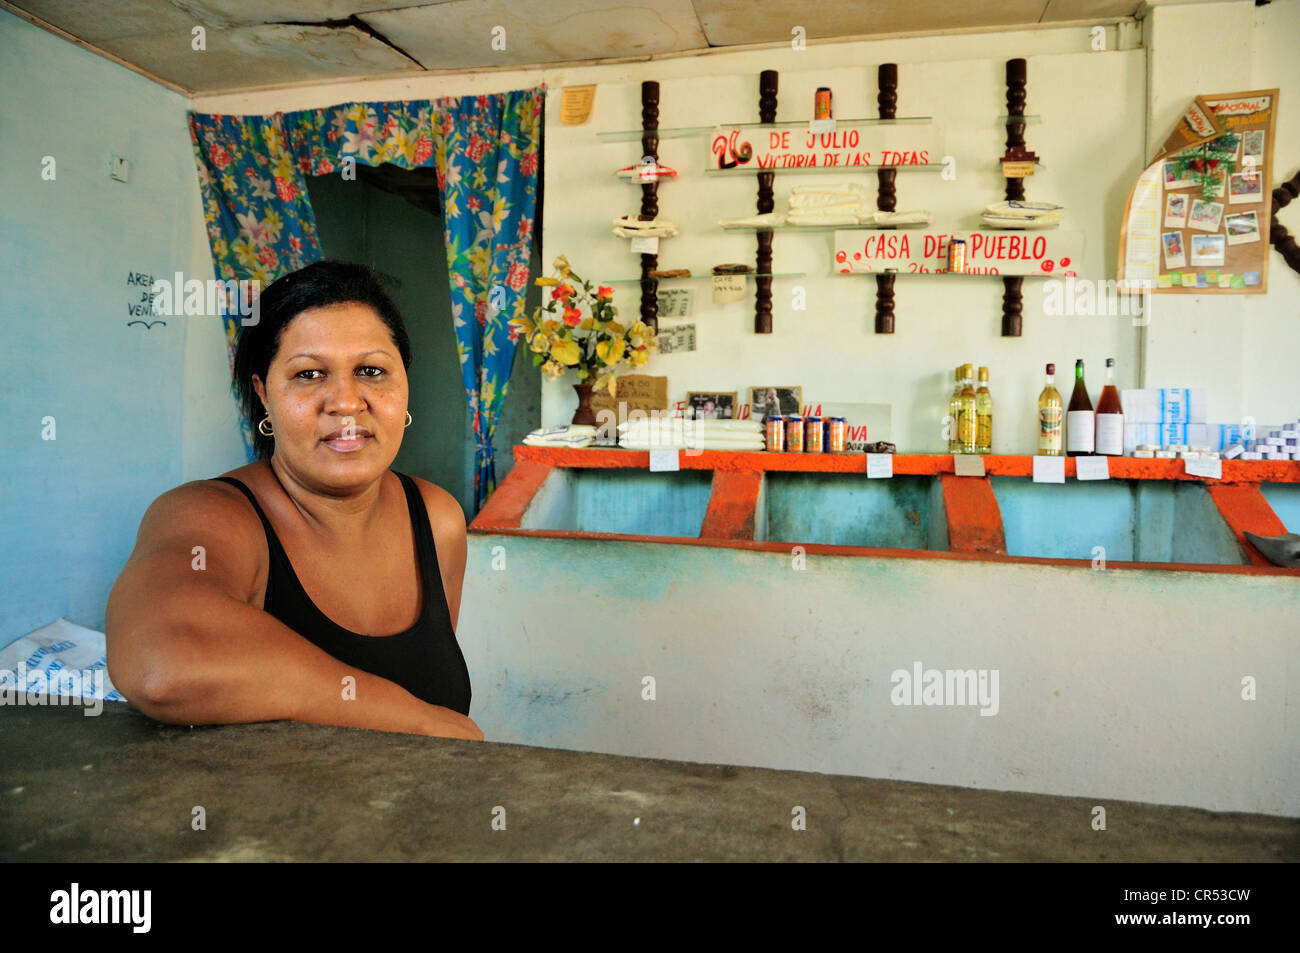 Saleswoman in a bodega, a government store which trades food items for ration coupons, Baracoa, Cuba, Caribbean Stock Photo